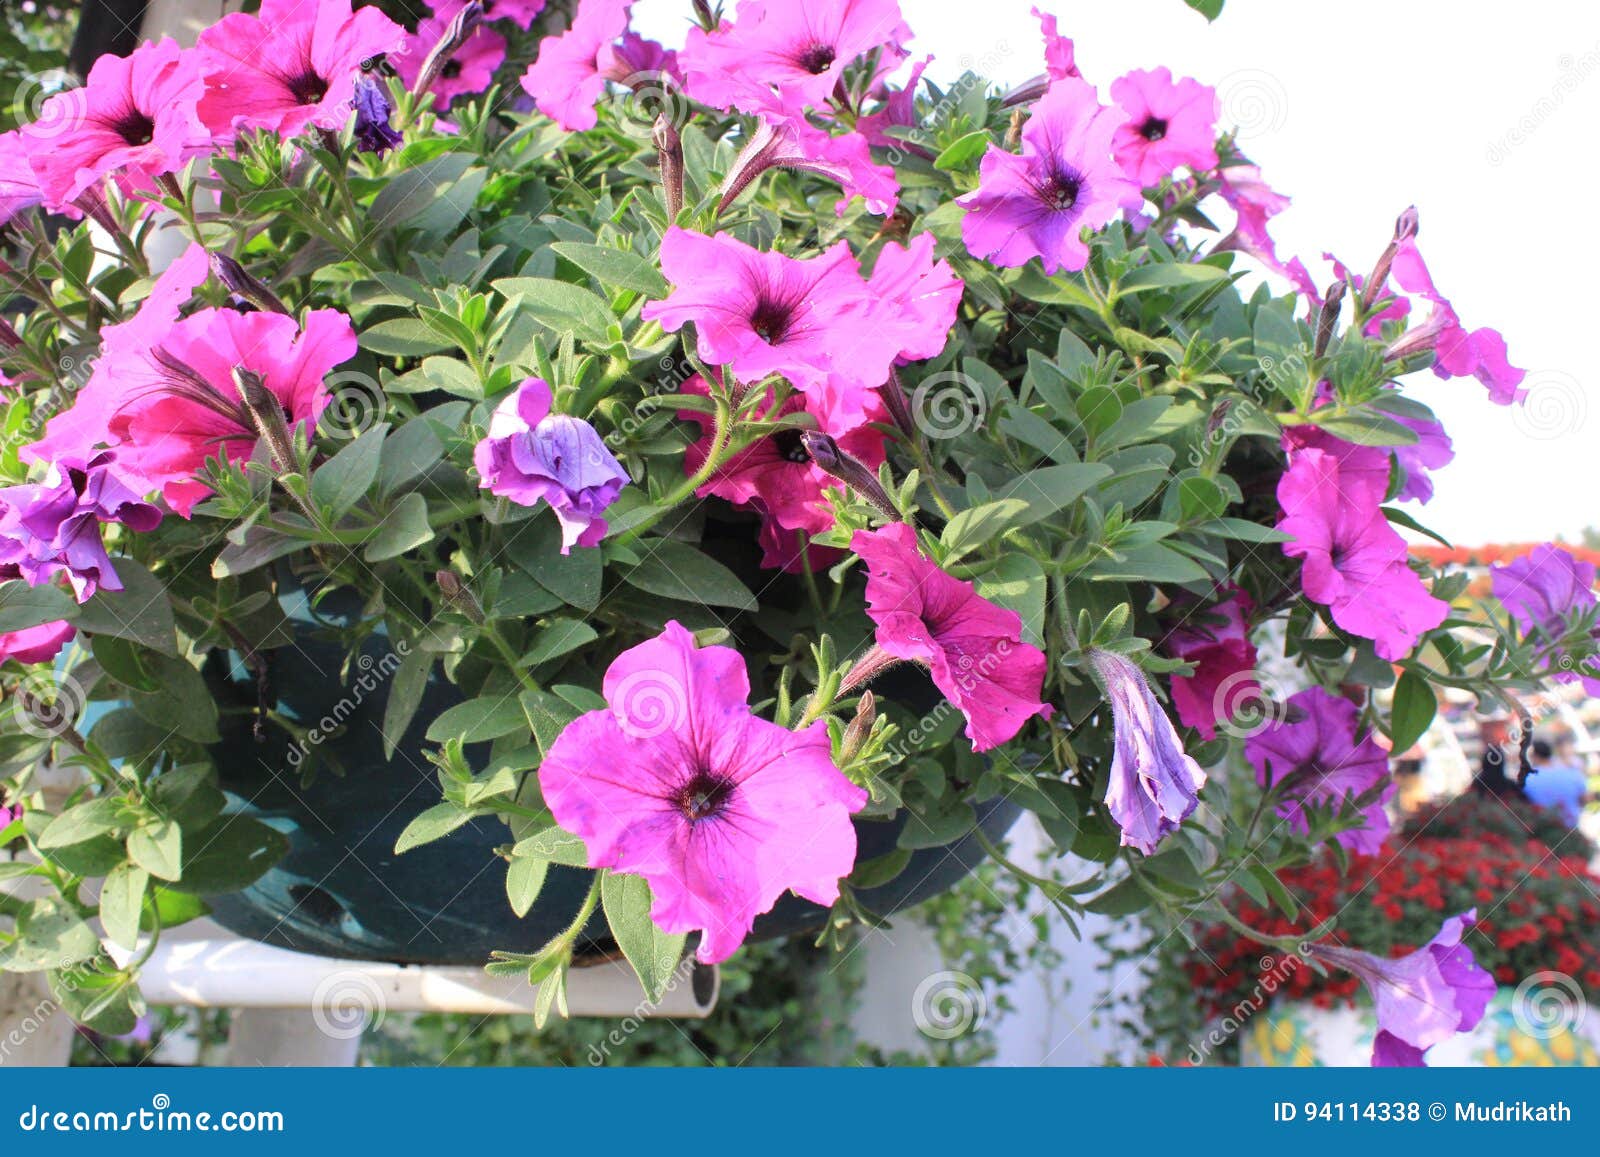 Purple Flowers in Miracle Garden Dubai Stock Photo - Image of colorful ...